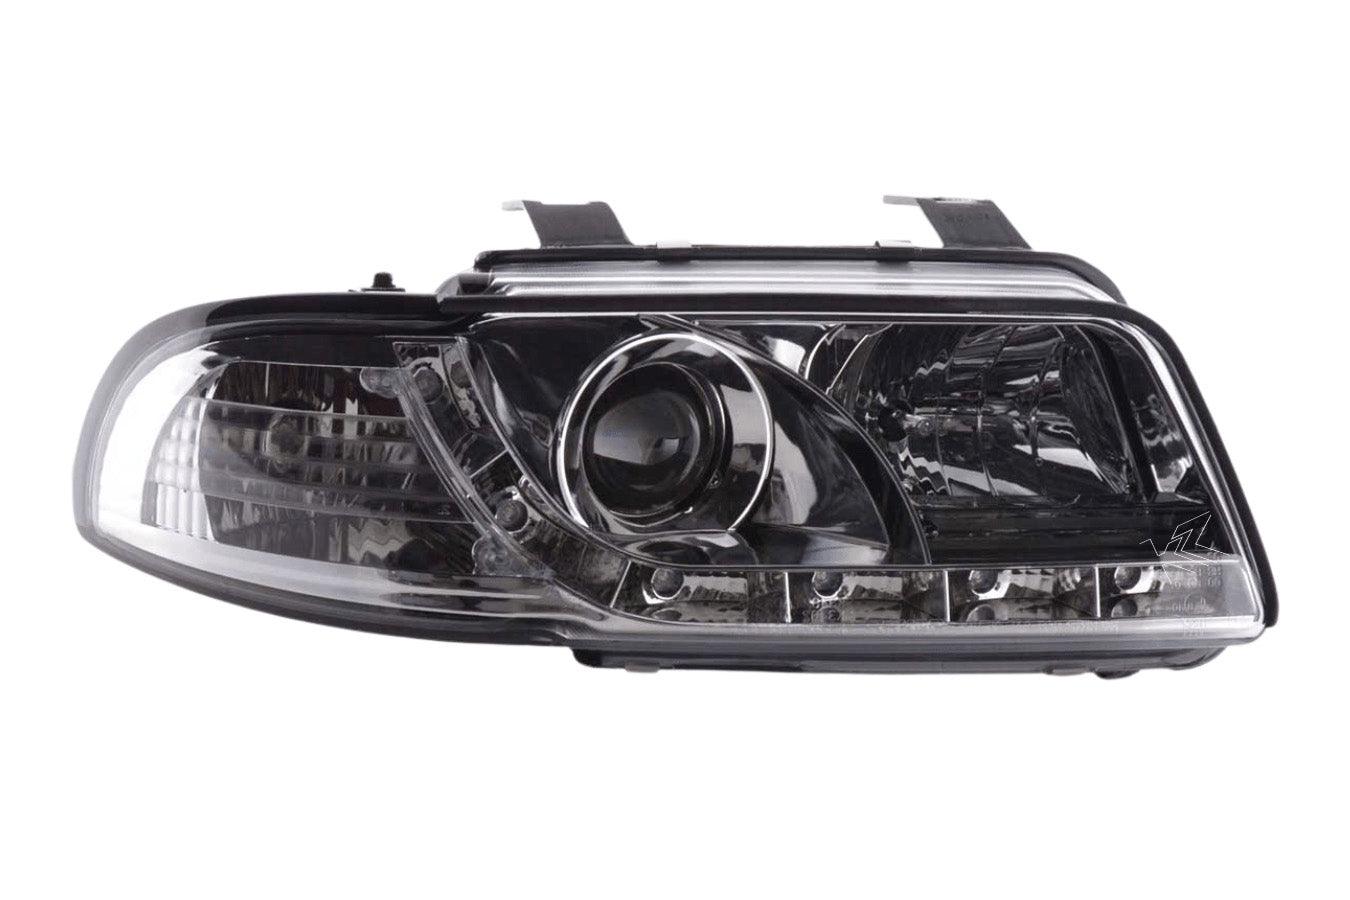 Audi A4 (B5 8D) Chrome LED Headlights with Daytime Running Lights (1995-1999) - K2 Industries